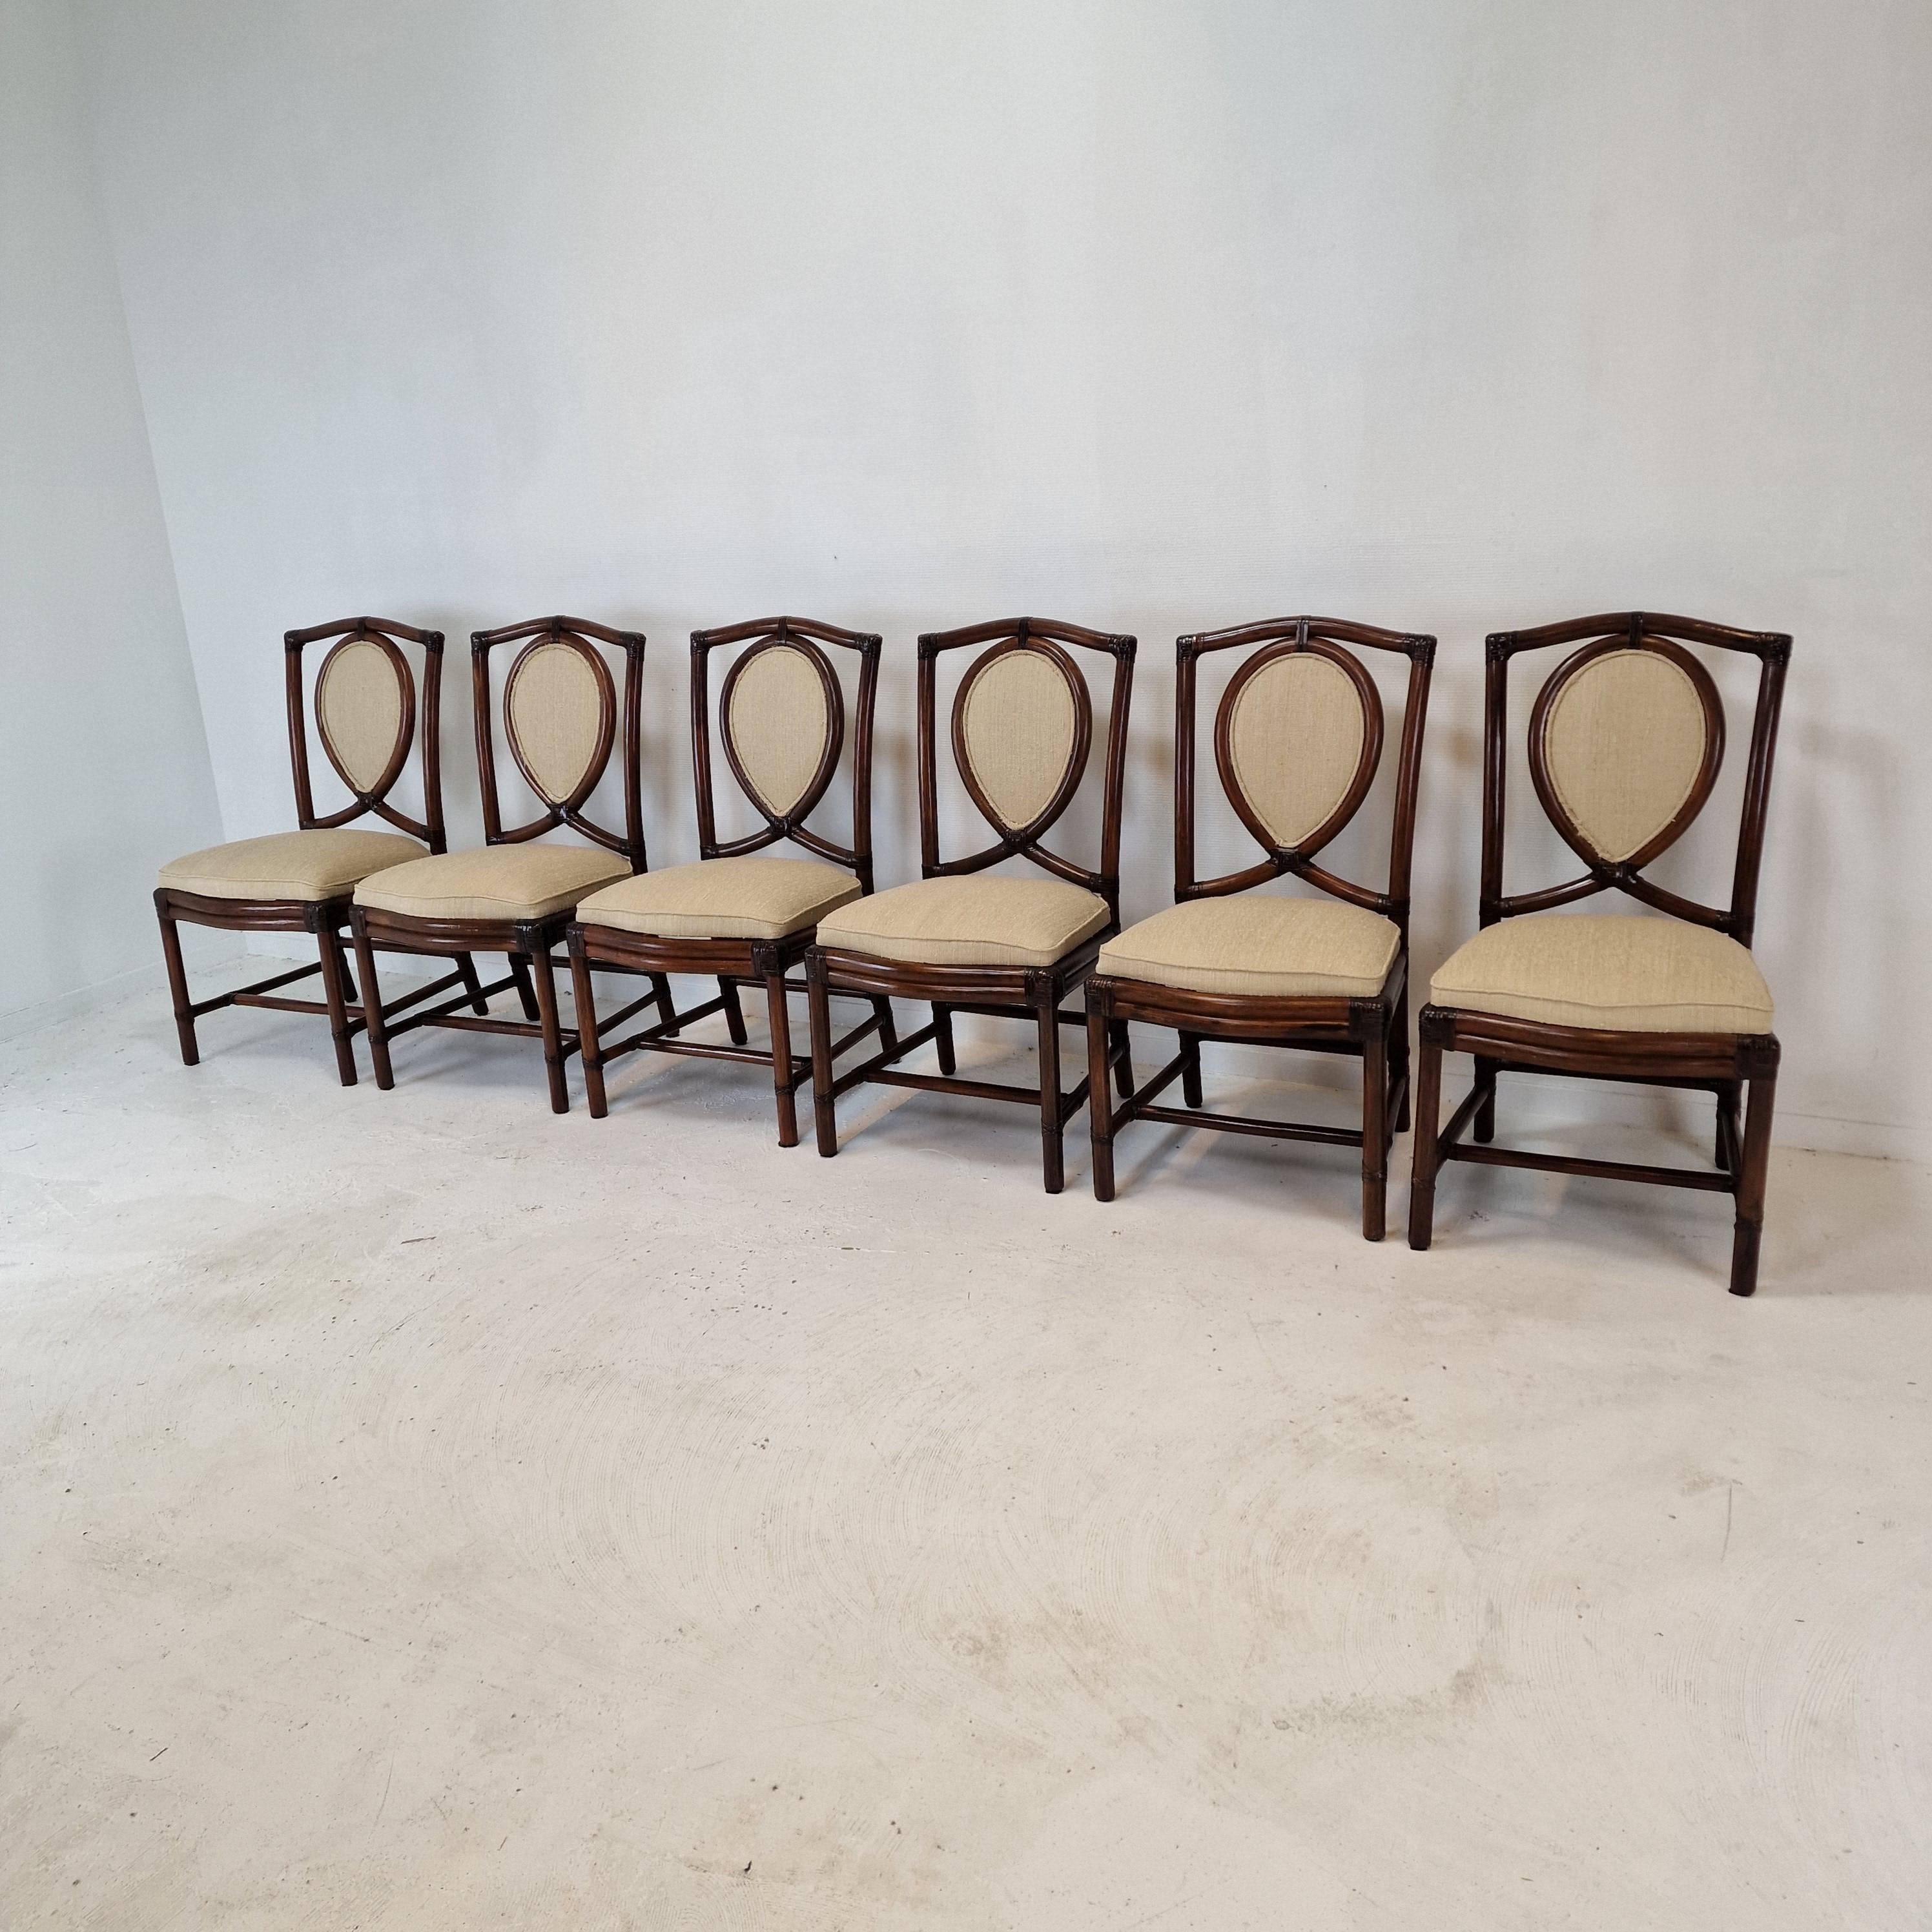 Mid-Century Modern Set of 6 Bamboo Dining Chairs from Gasparucci Italo, 1970s For Sale